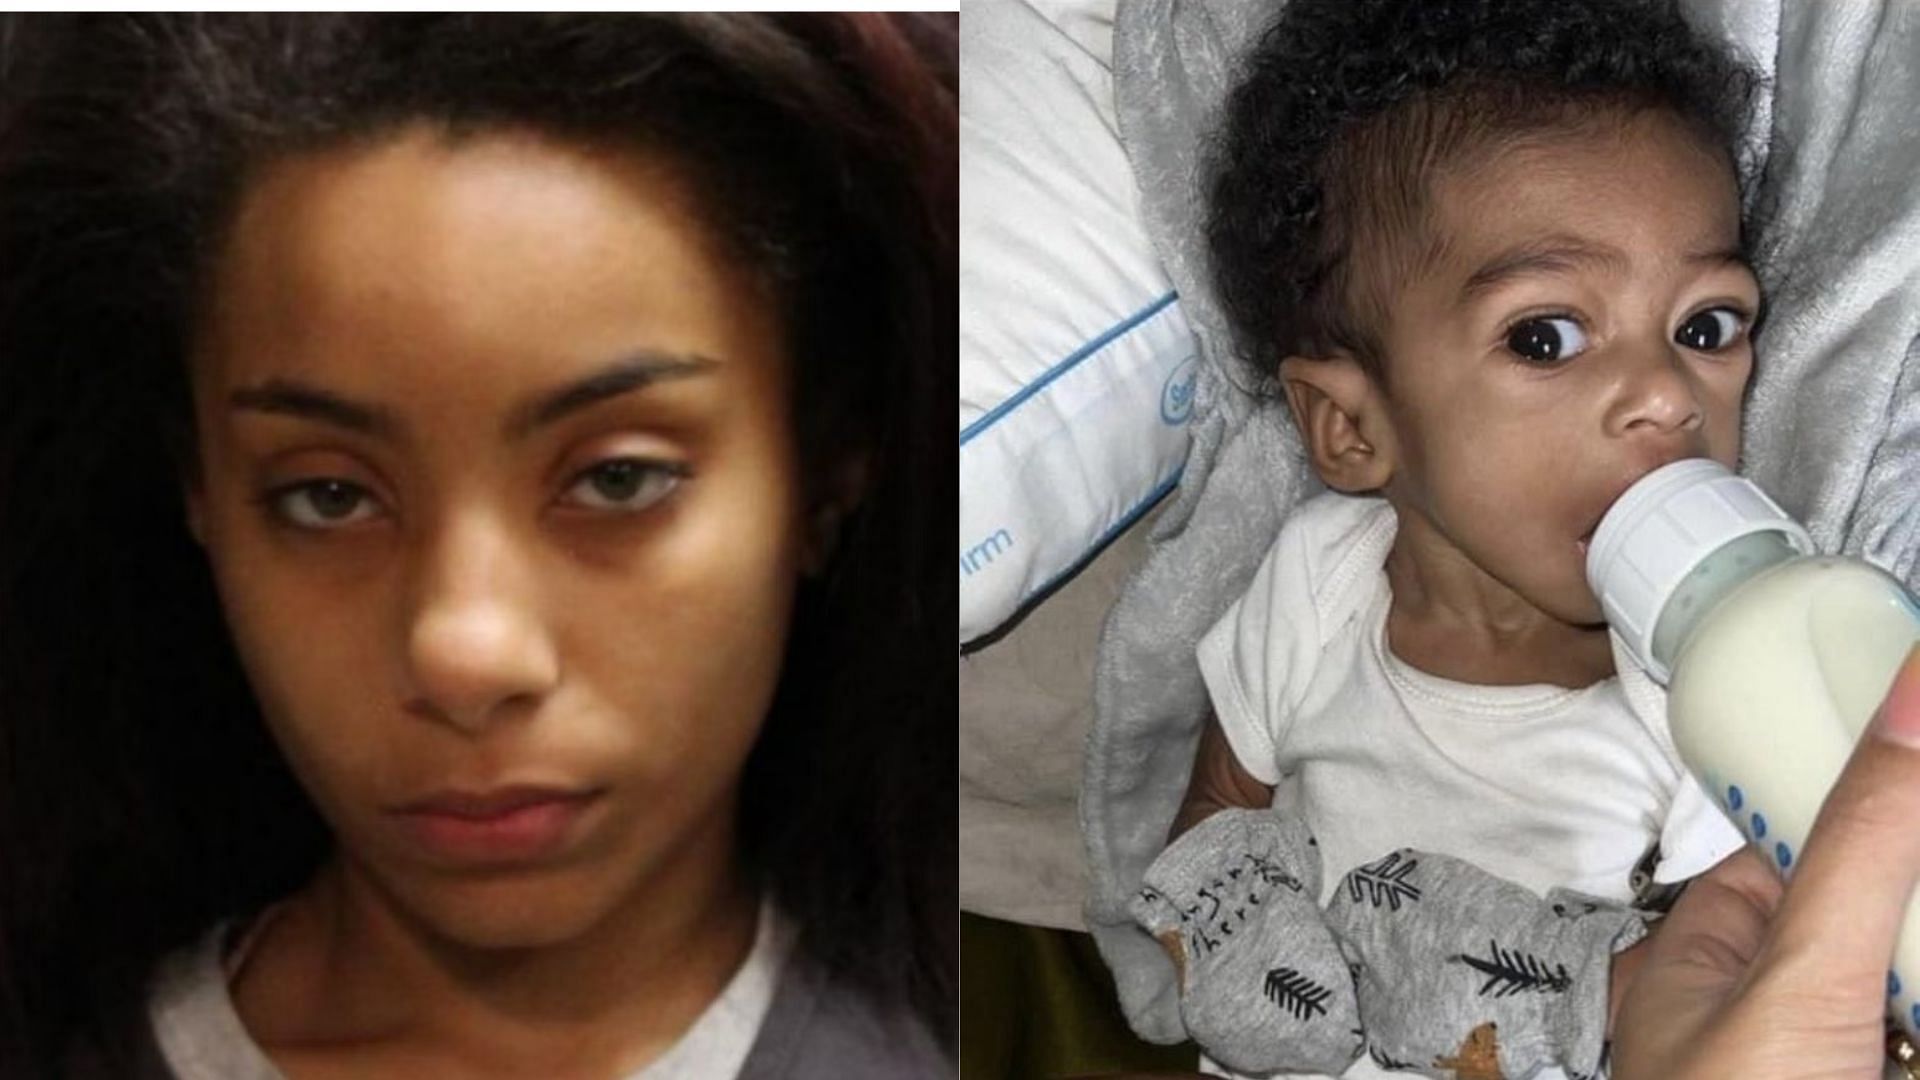 3 year old mother arrested for child neglect and abuse (Image via Twitter/@LADDY__BEE and @BoneKnightmare)